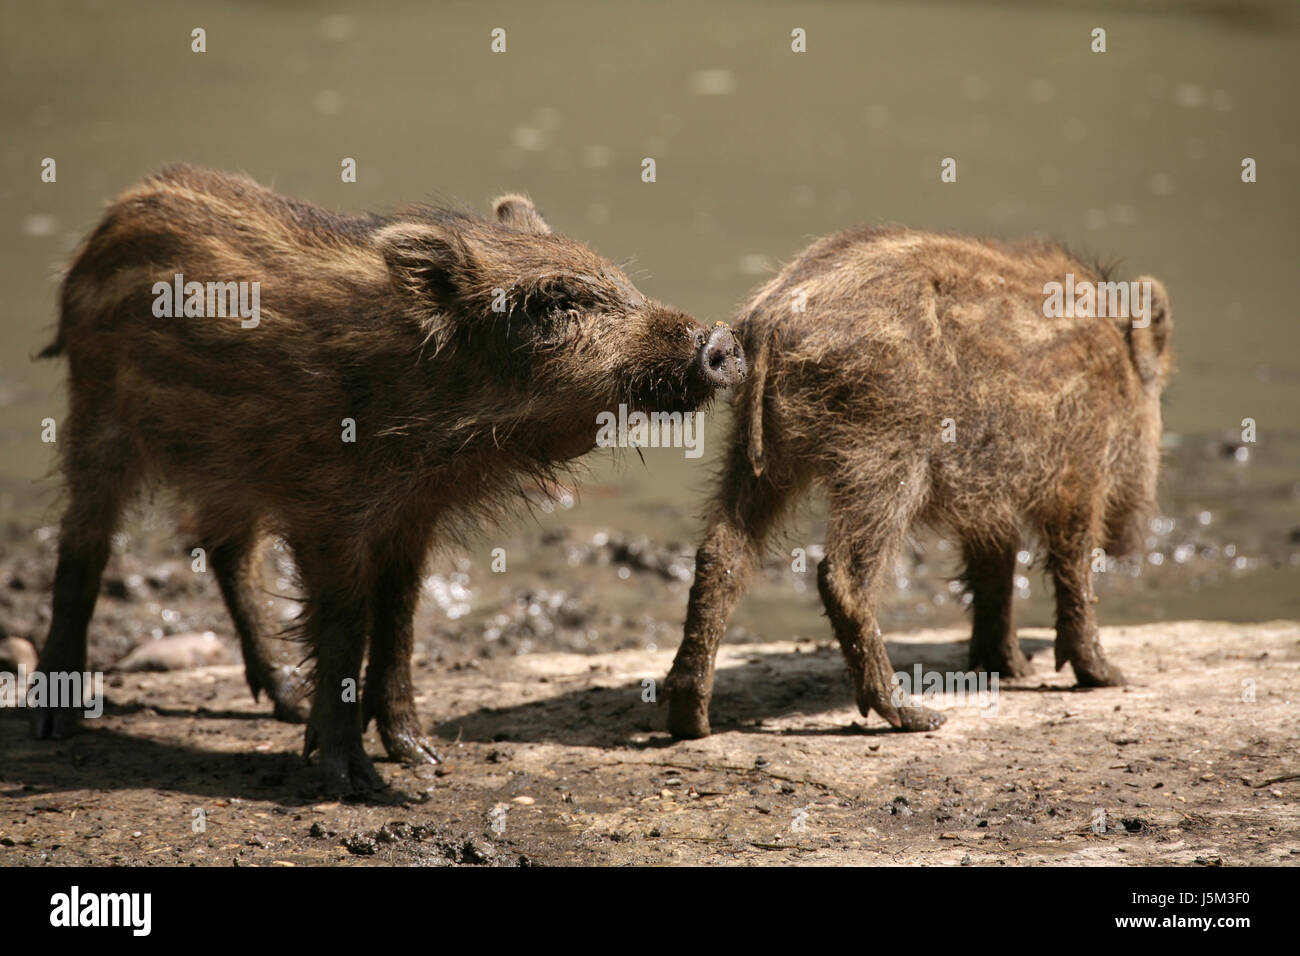 mammal wild wild boar pig wild animal wild boars dig young younger animal child Stock Photo